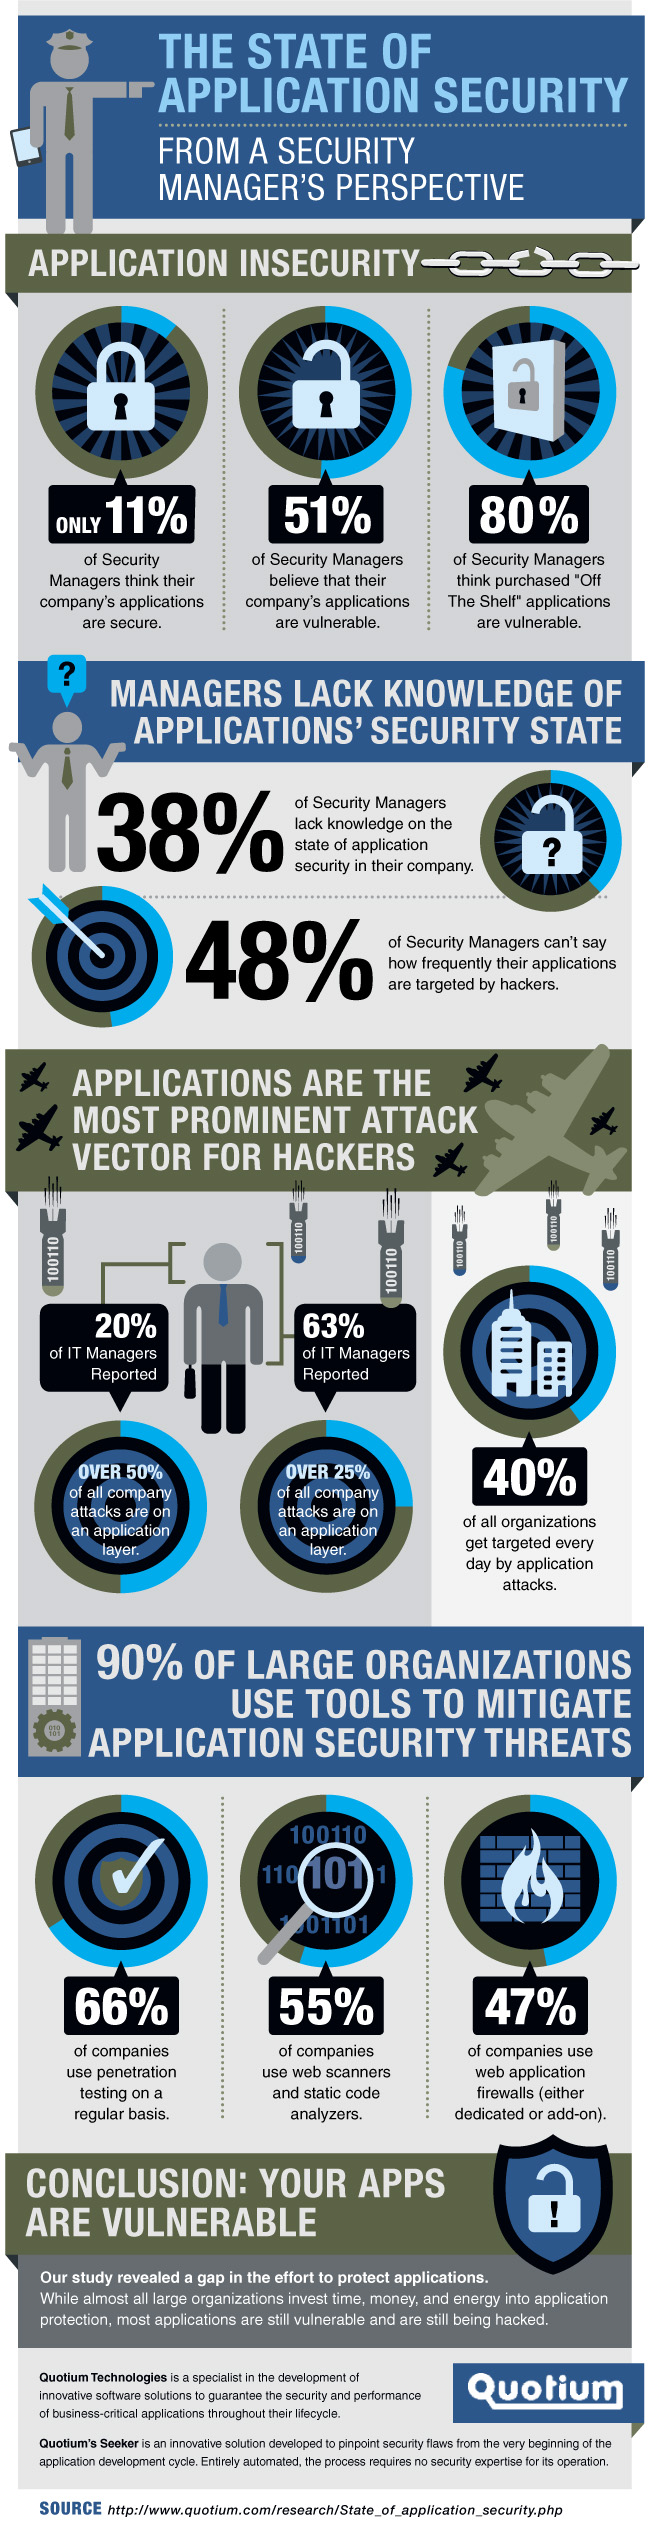 State of Application Security From an IT Manager's Perspective